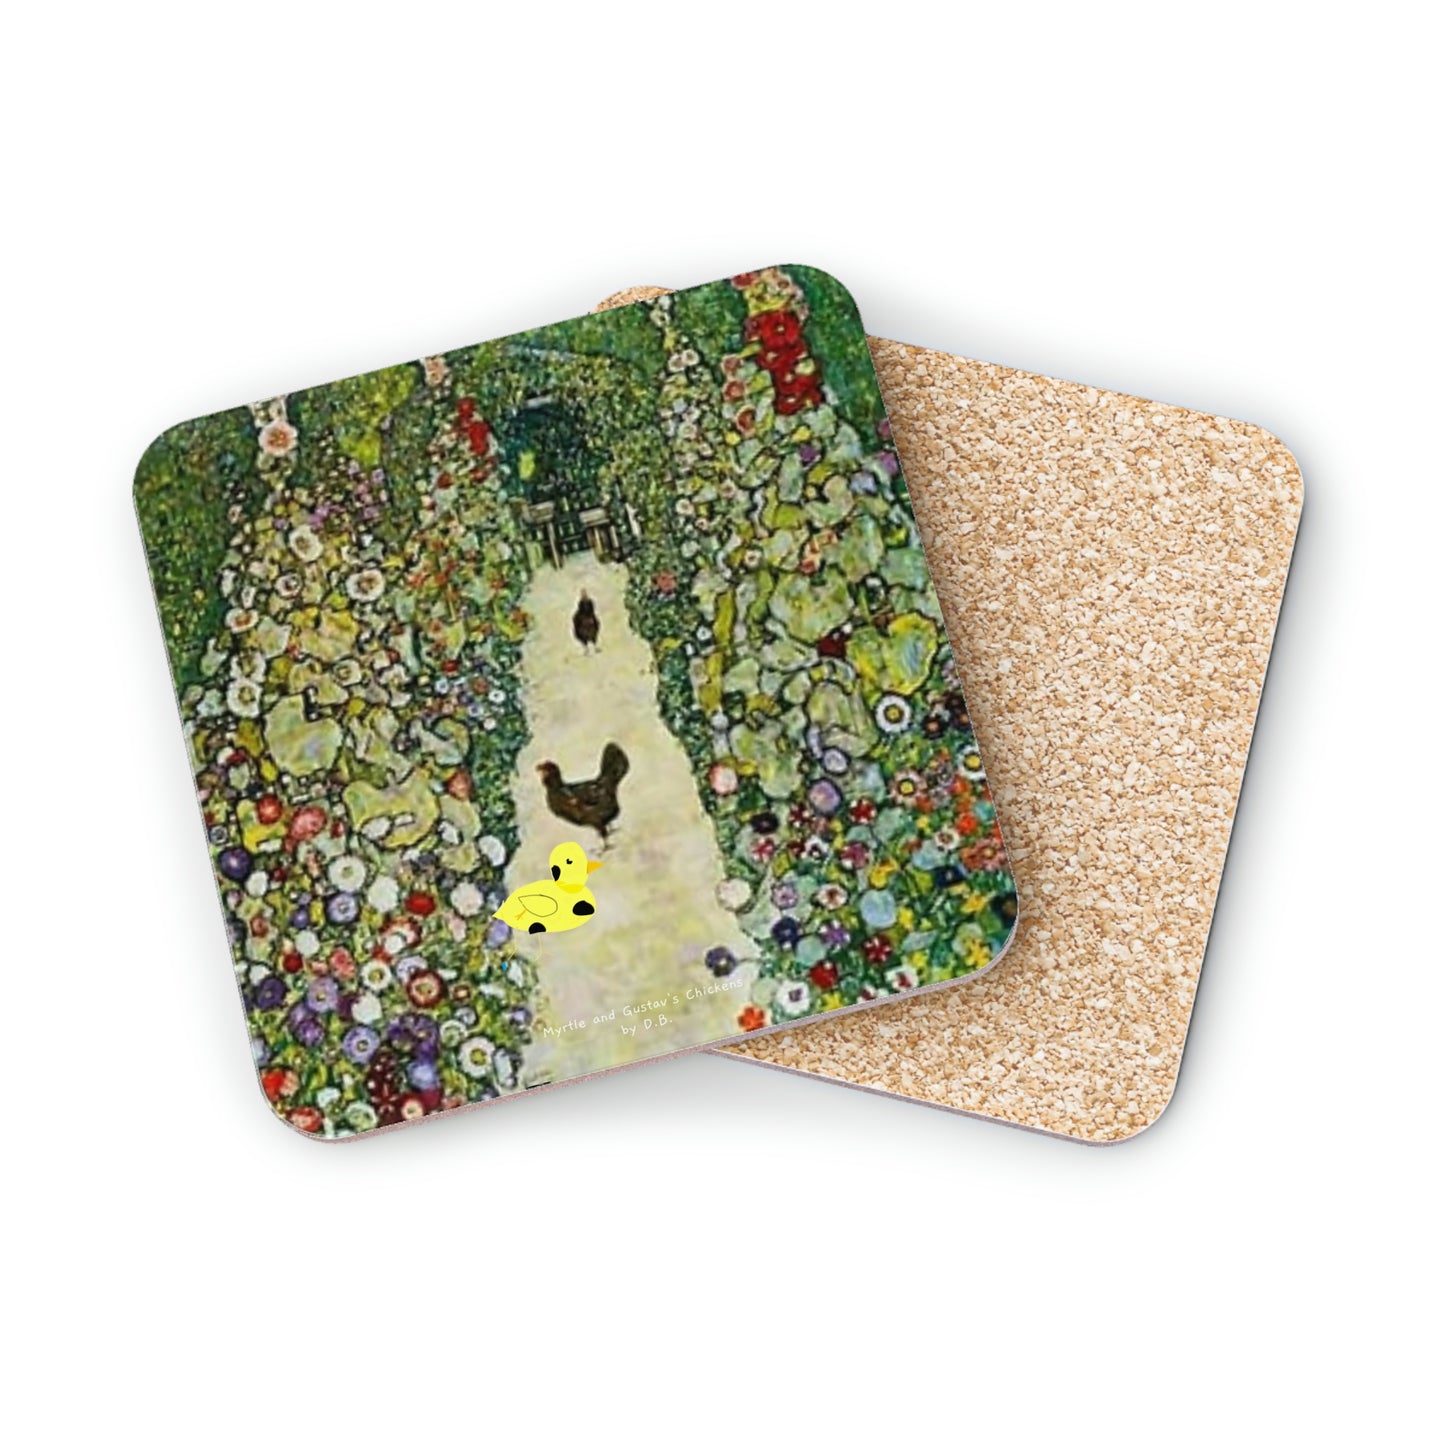 Myrtle and Gustav's Chickens by D.B. printed on stylish Drink Coasters